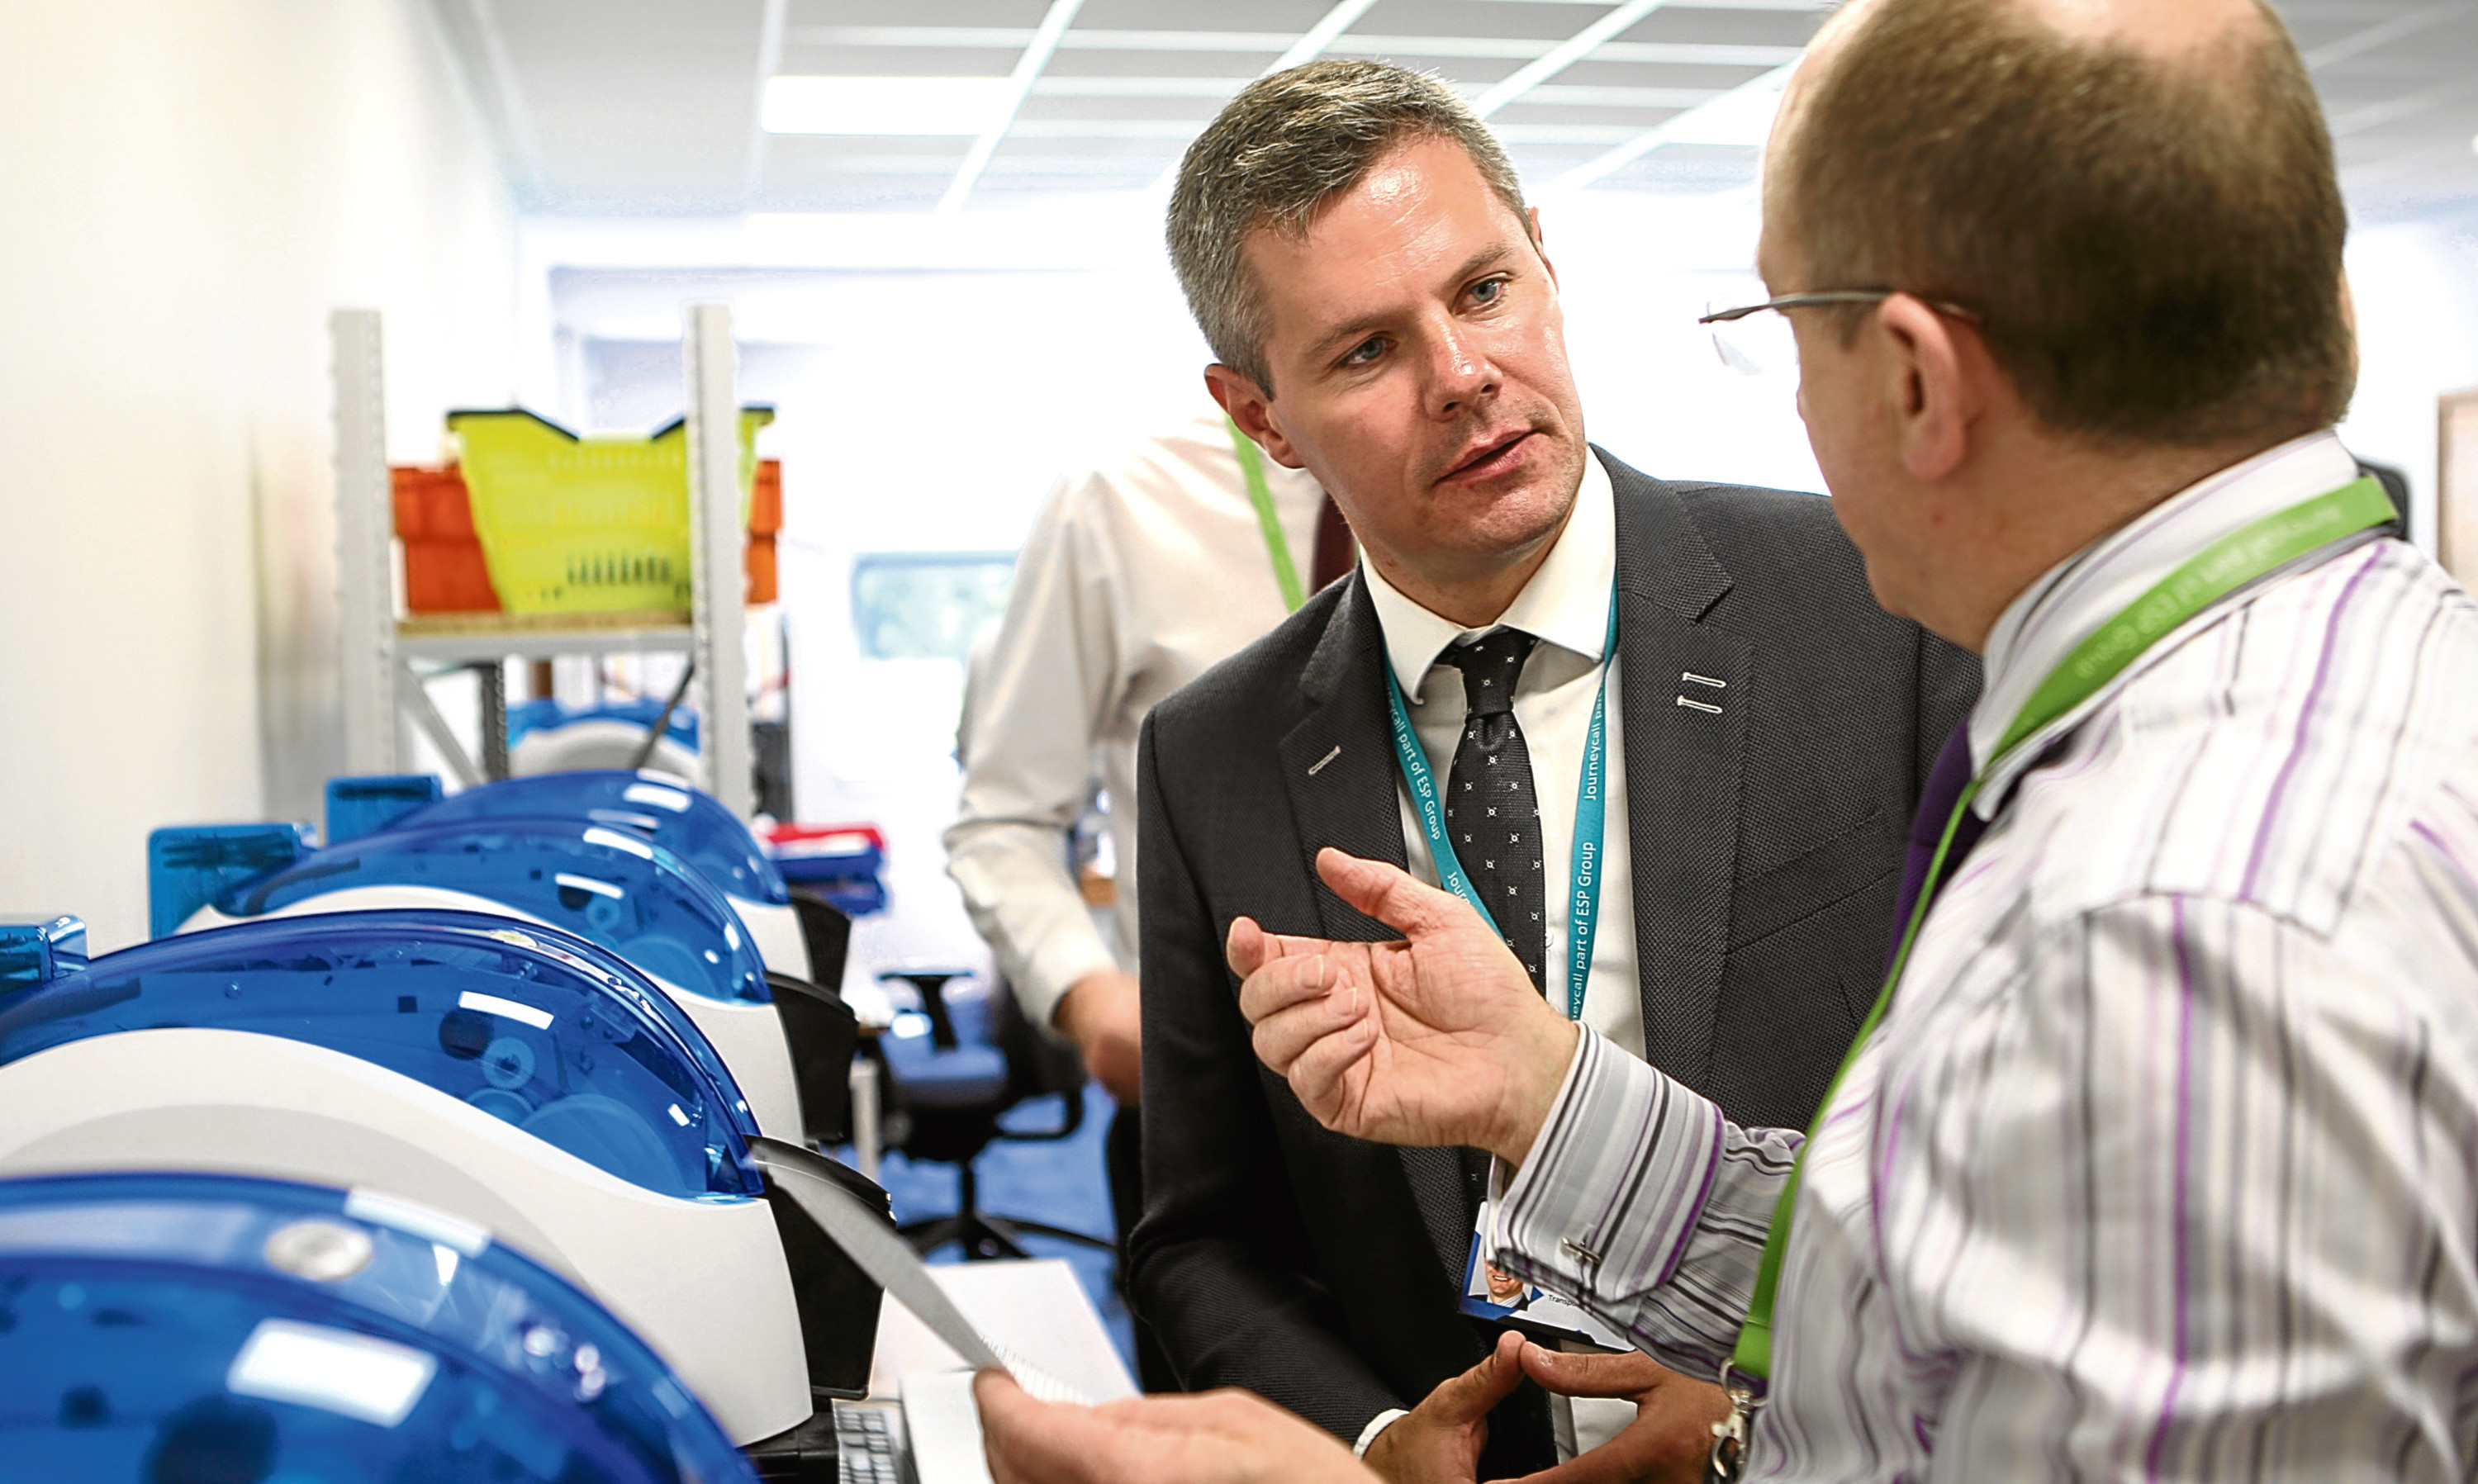 Cabinet Secretary for Finance Derek Mackay talks to a staff member during a ministerial visit to Journeycall in Arbroath.